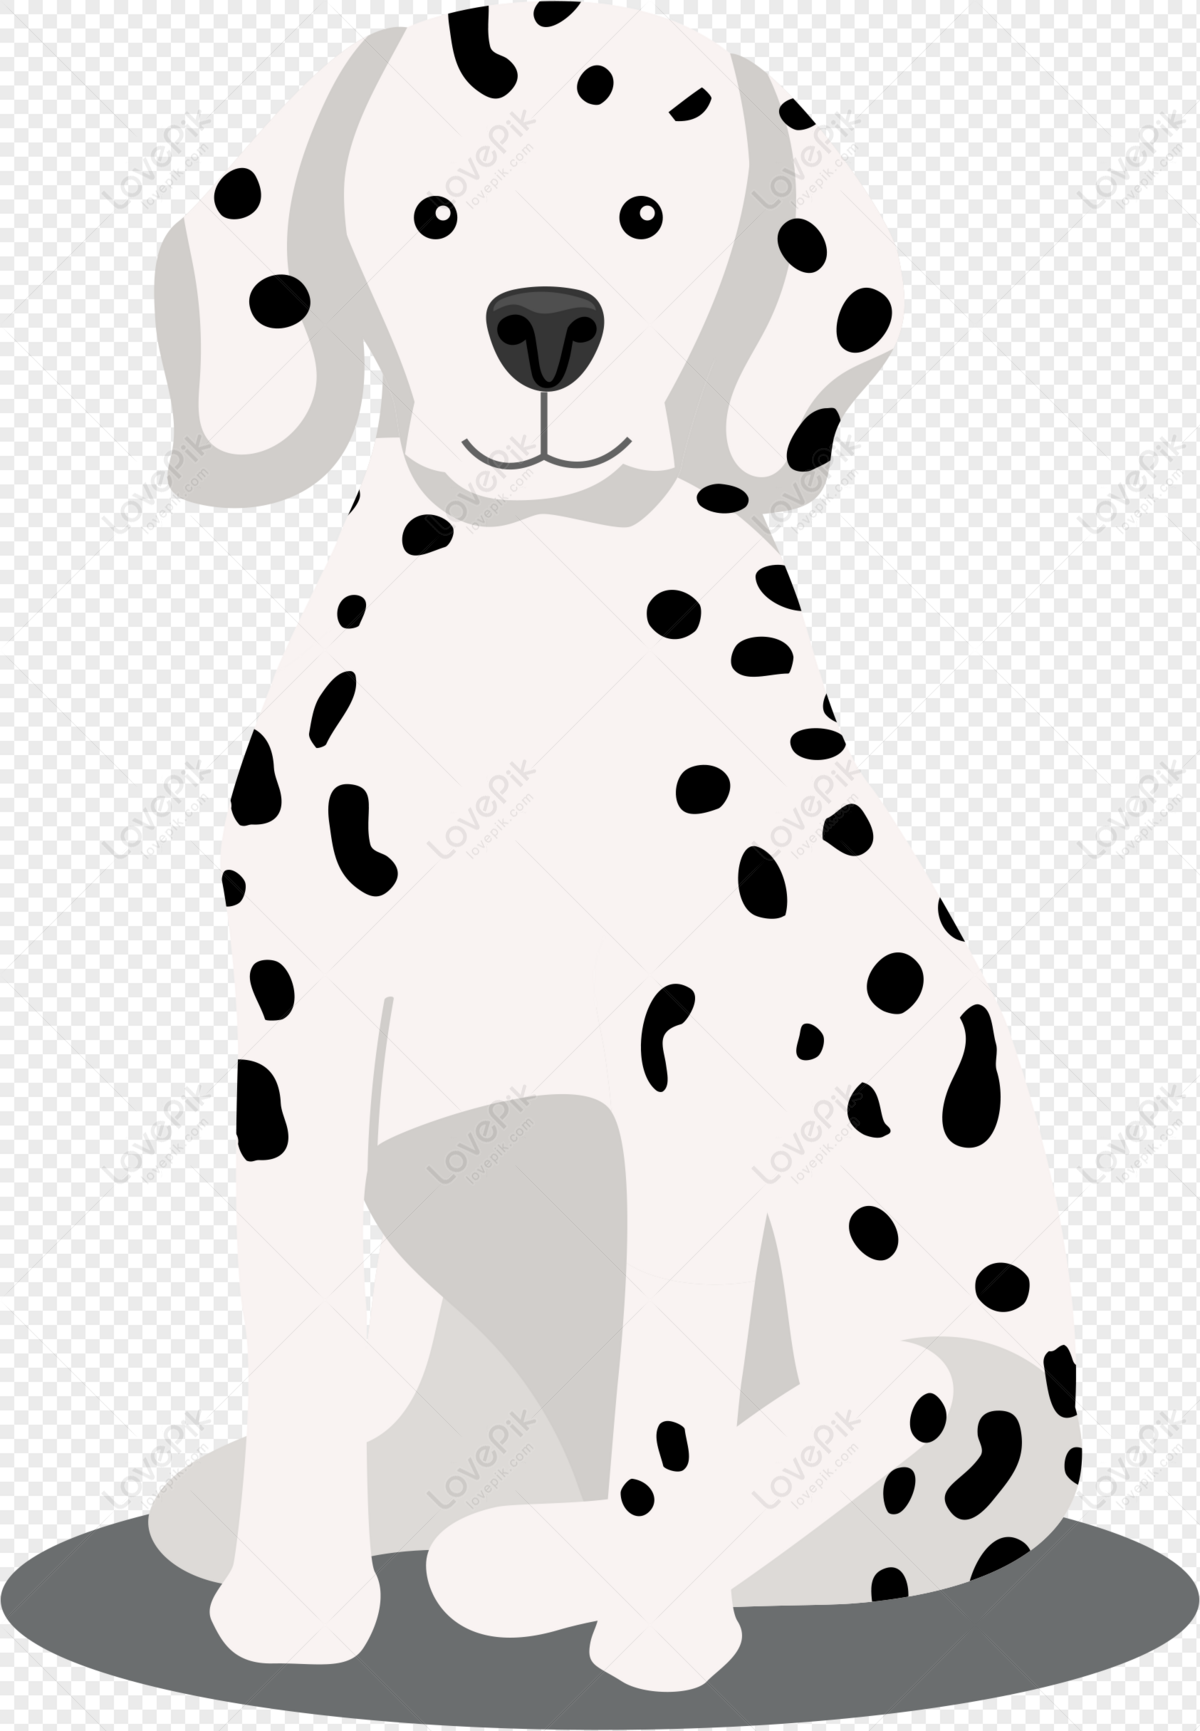 Dalmatian PNG Picture And Clipart Image For Free Download - Lovepik |  401452305